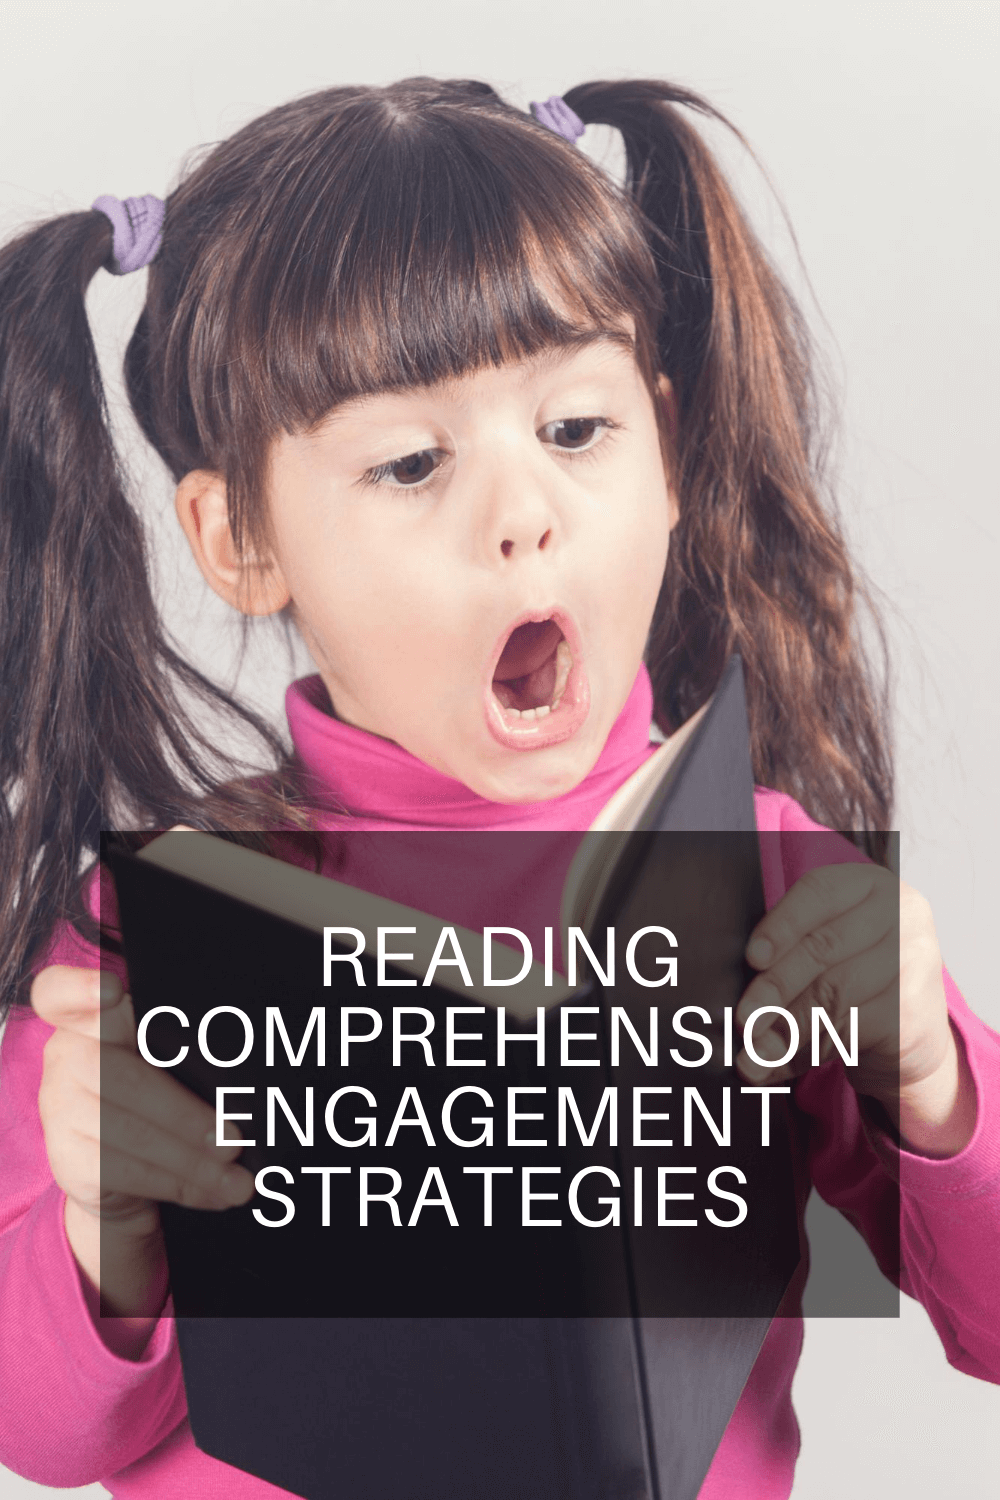 tall image of dark haired girl reading a book looking surprised with the words Reading Comprehension Engagement Strategies.